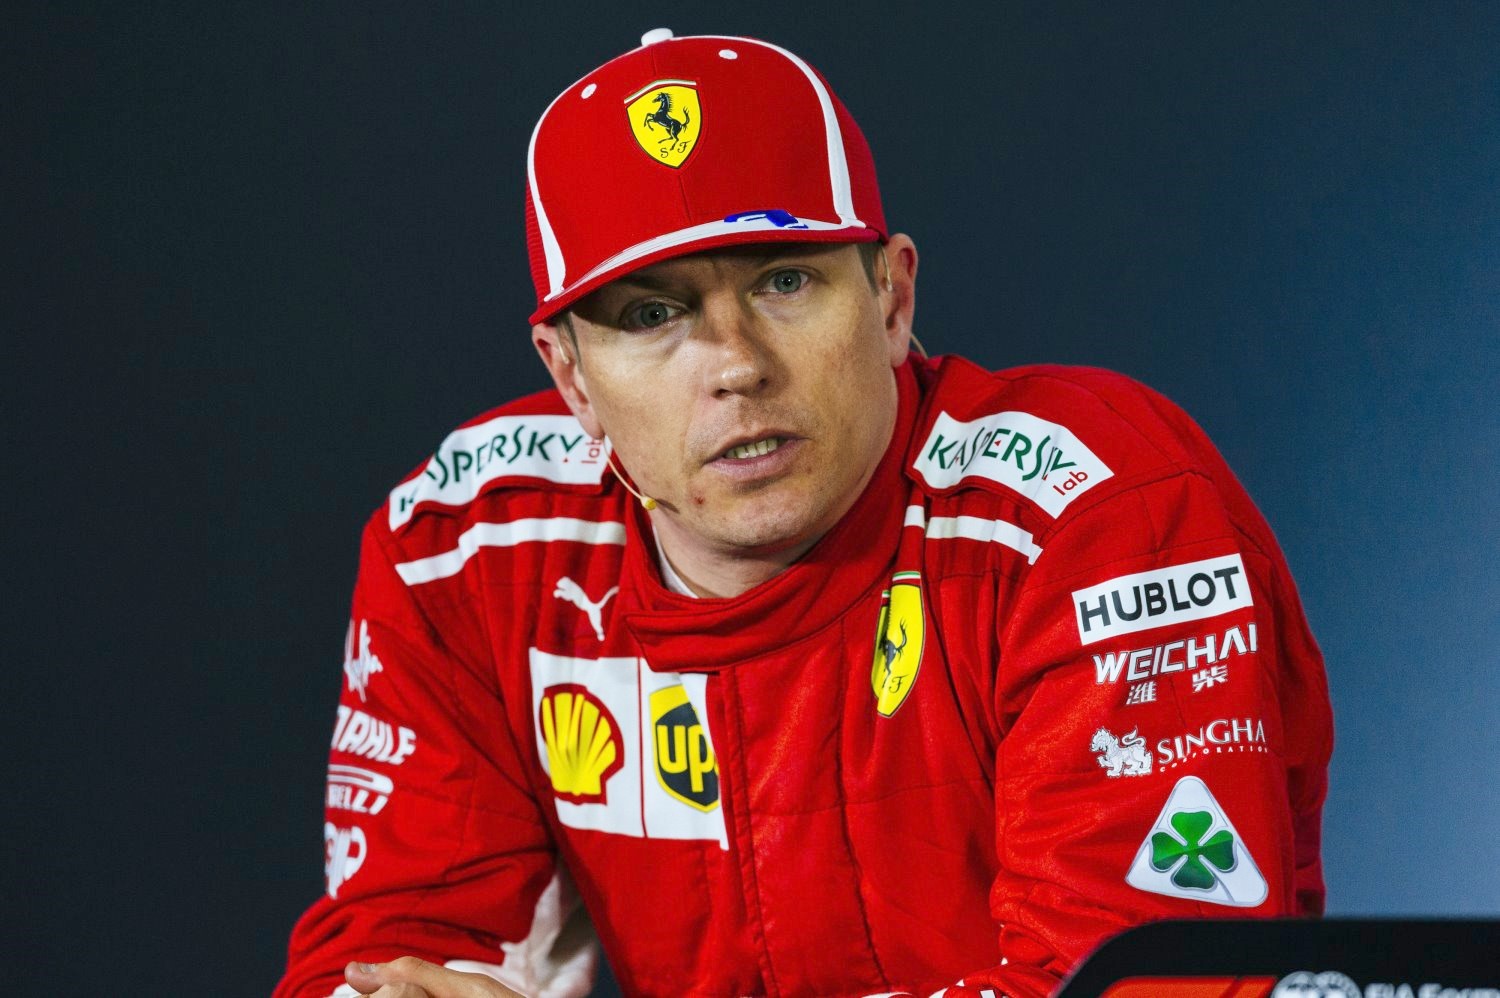 Raikkonen would be a step up from Vandoorne for sure